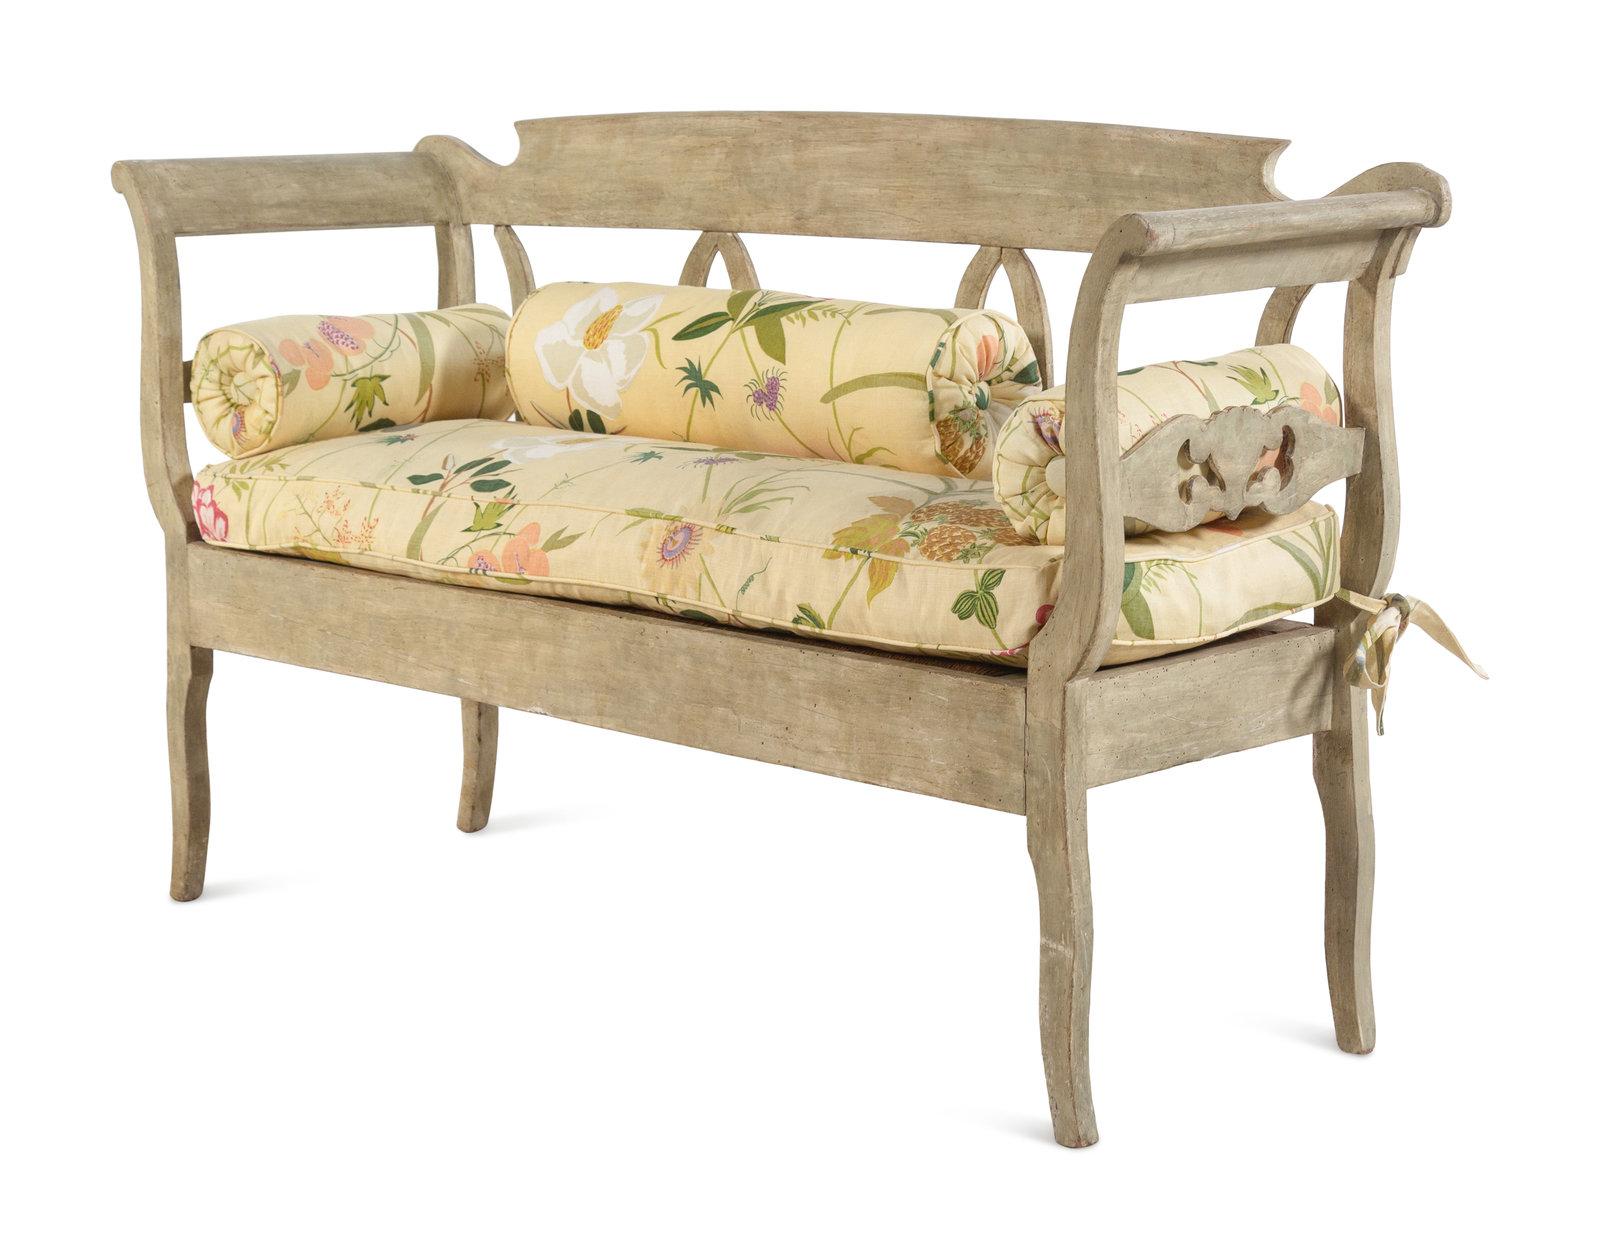 Italian Painted Settee with Seat Cushion and Pillows, 20th Century In Good Condition For Sale In Savannah, GA